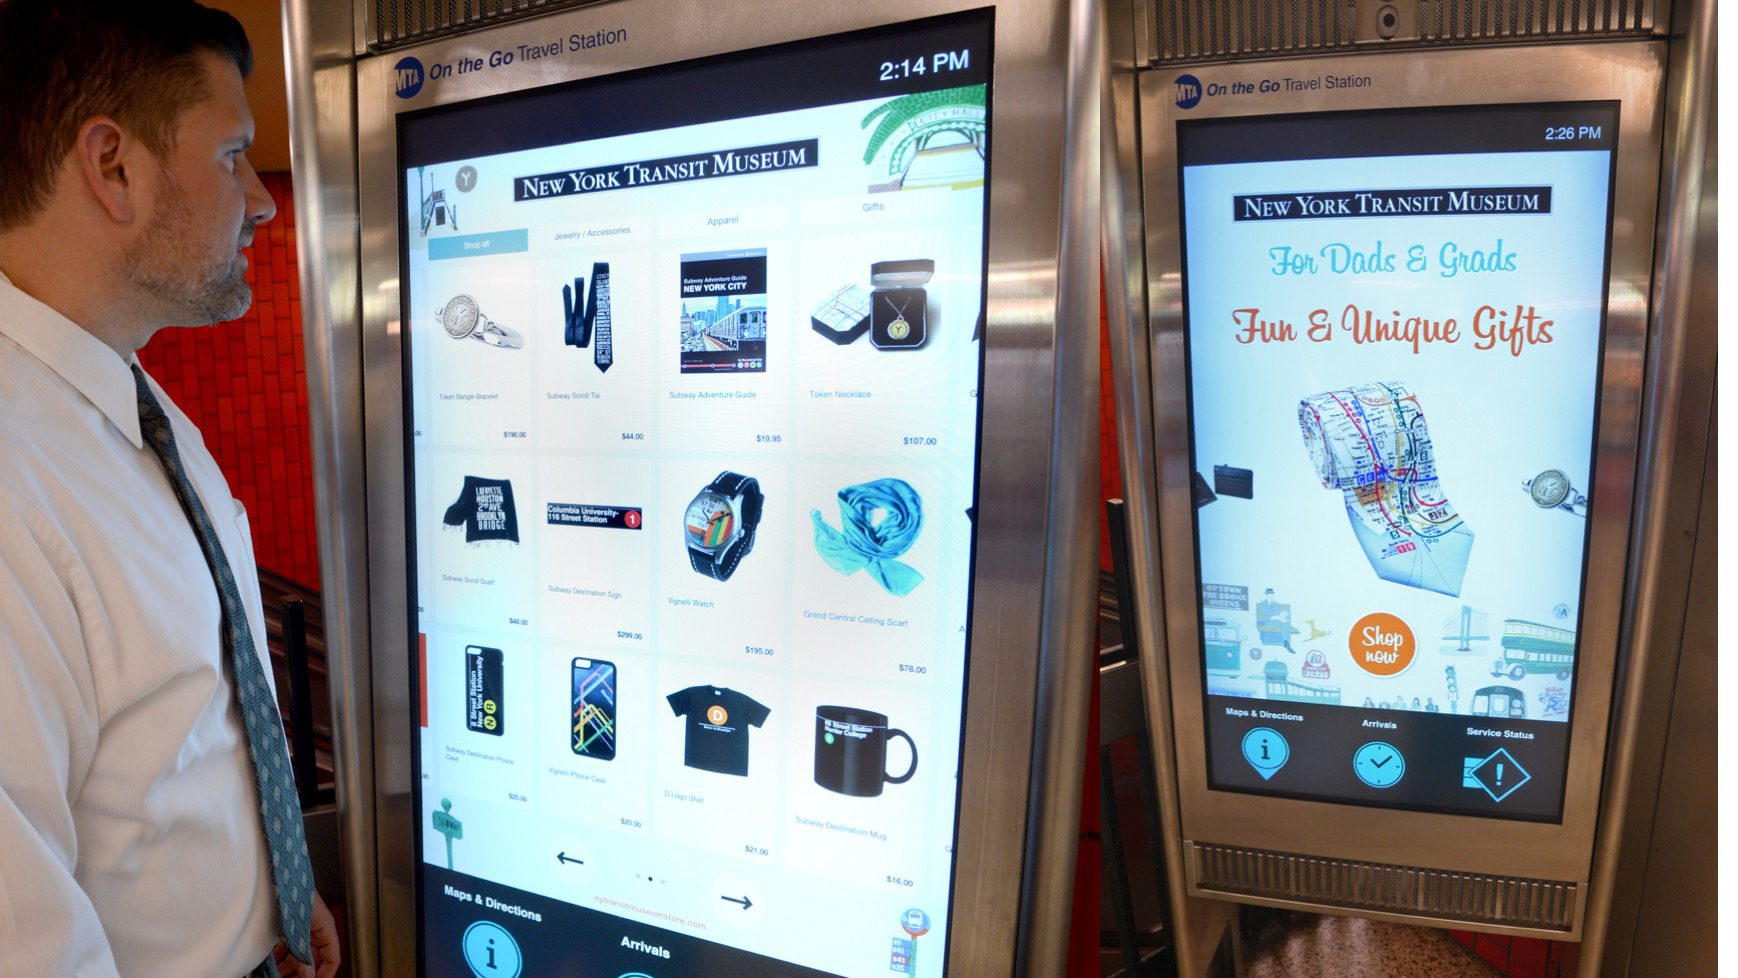 ON THE GO OFFERS E-TAIL SHOPPING EXPERIENCE FOR   “DADS & GRADS” THROUGHOUT THE NYC SUBWAY SYSTEM